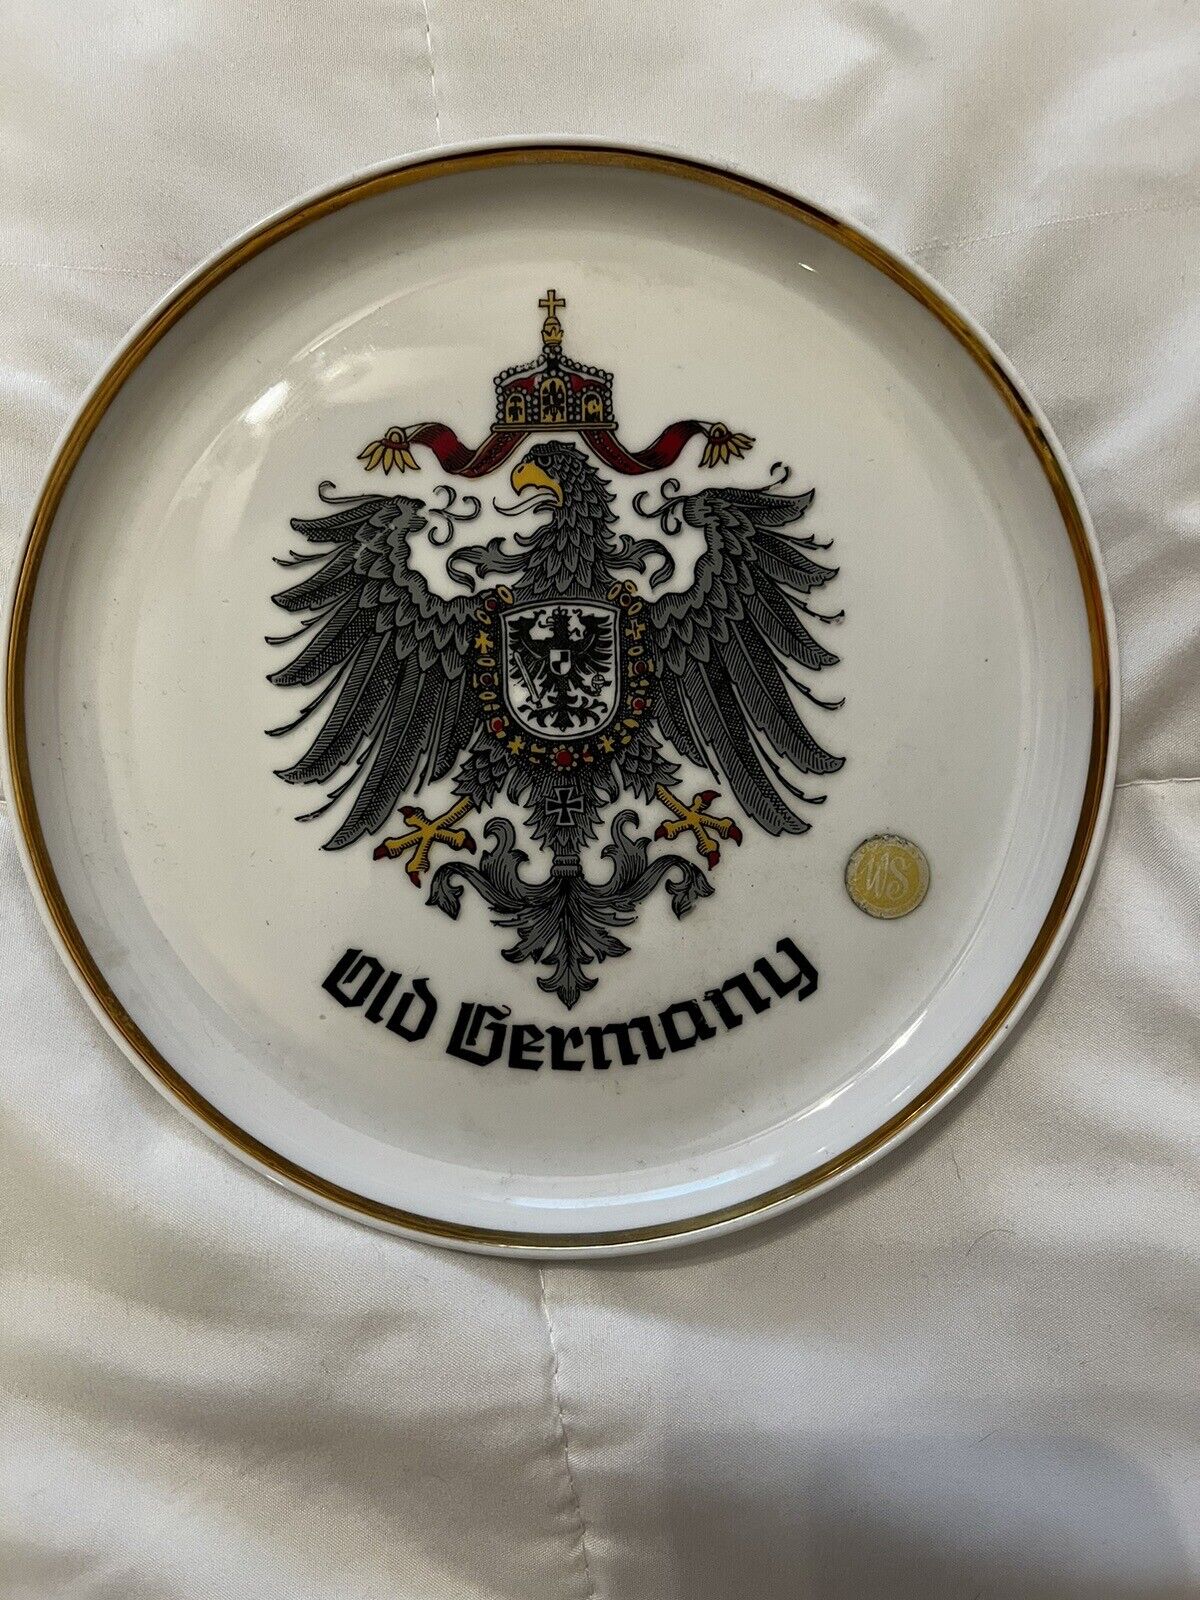 Old Germany Plate Collectors Item